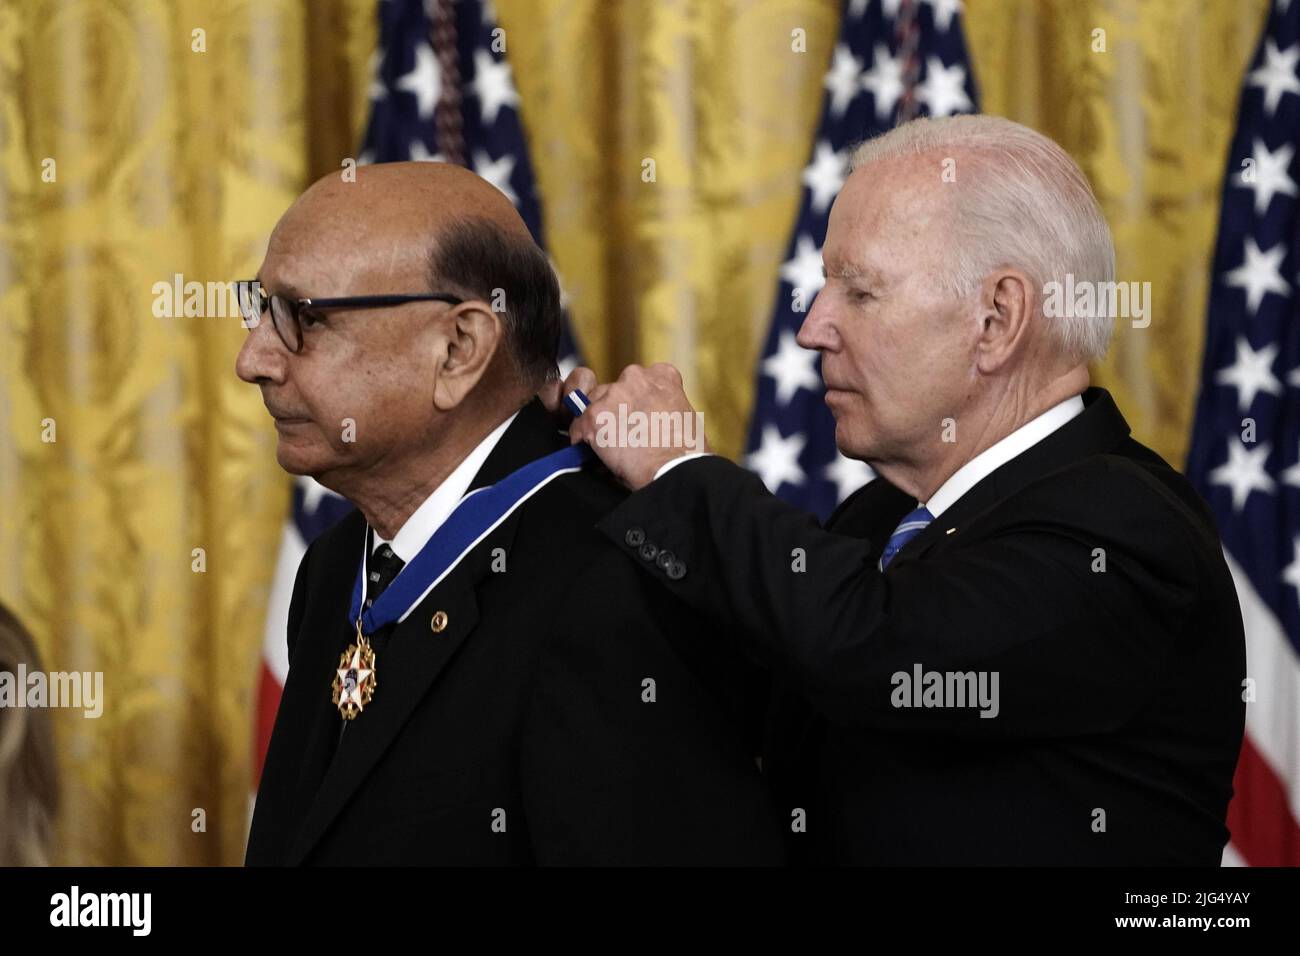 Washington, United States. 07th July, 2022. U.S. President Joe Biden awards the Presidential Medal of Freedom to Father Alexander Karloutsos, former Vicar General of the Greek Orthodox Archdiocese of America, and sixteen other recipients in the East Room of the White House in Washington, DC on Thursday, July 7, 2022. Photo by Ken Cedeno/UPI Credit: UPI/Alamy Live News Stock Photo